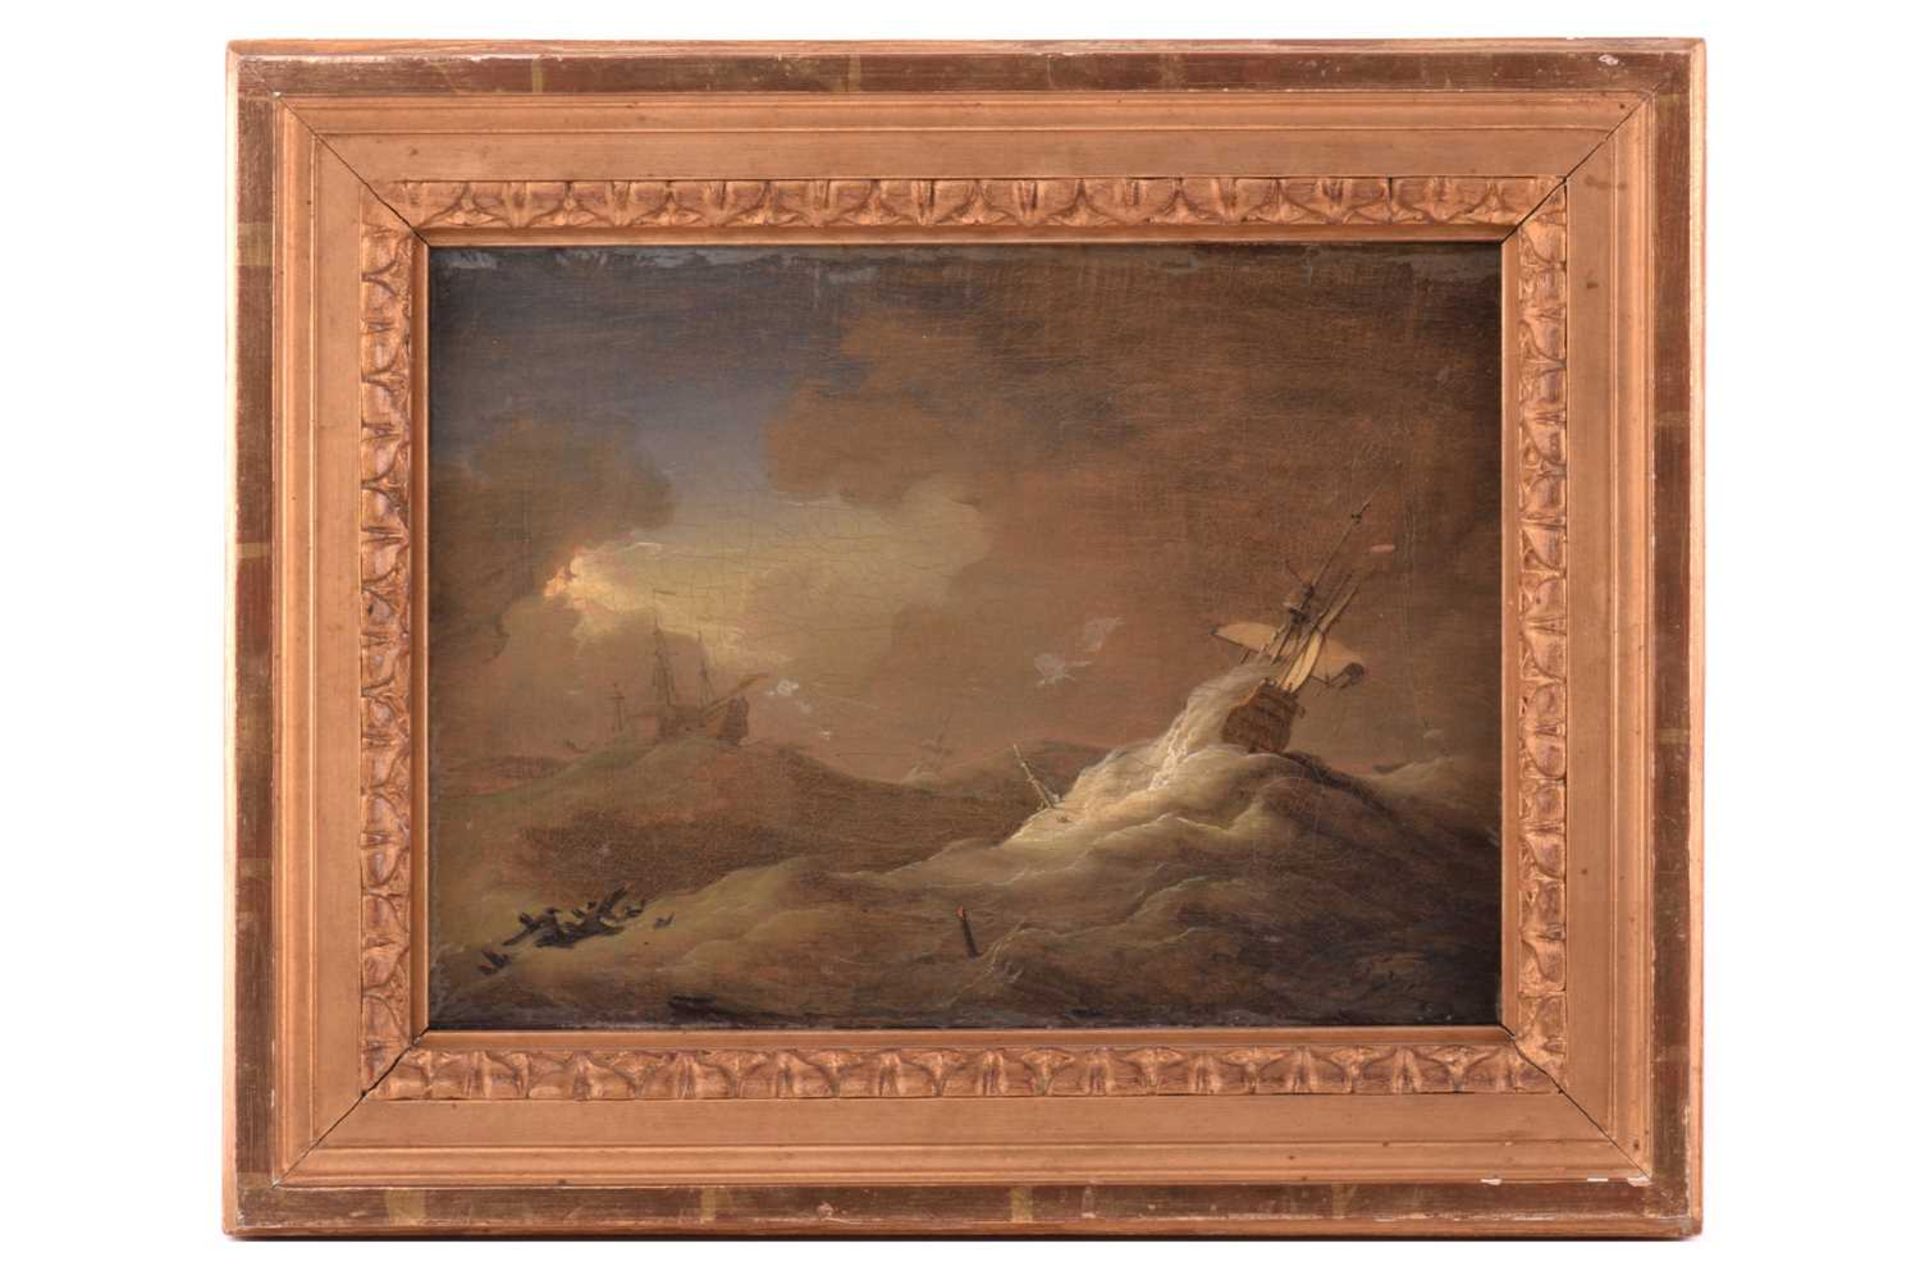 18th century Continental School, Galleons in a Storm, indistinctly signed bottom right, oil on